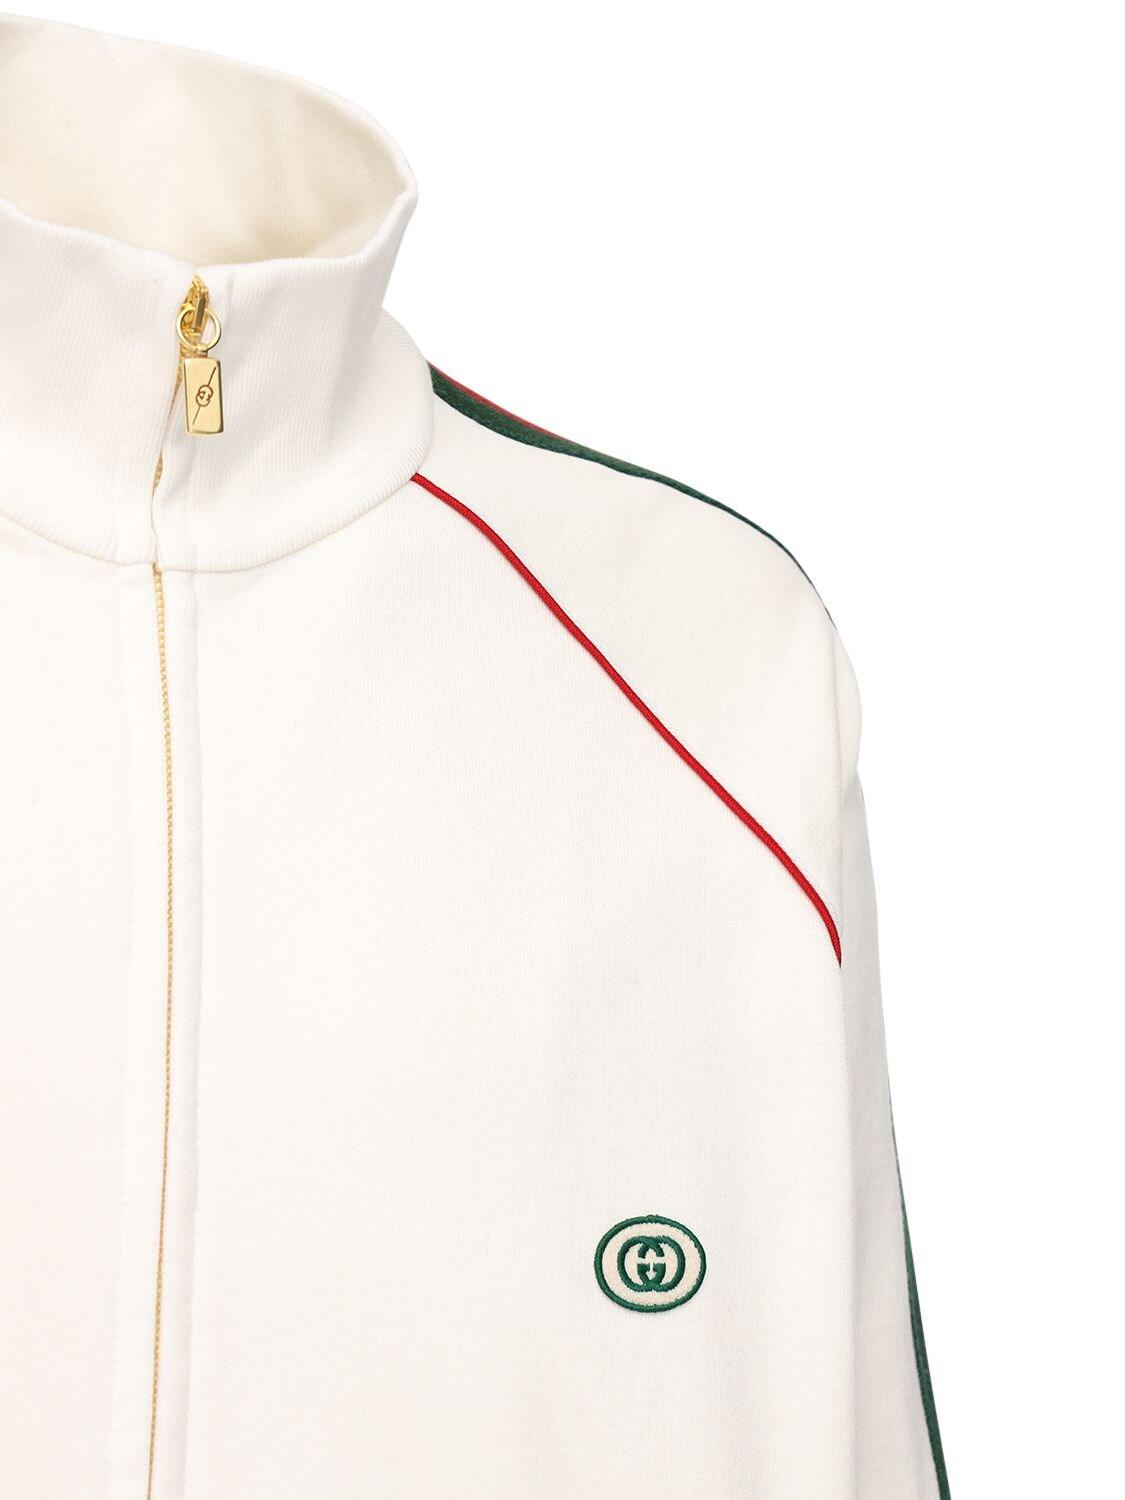 Gucci Cotton Jersey Zip Jacket with Web, Size M, White, Ready-to-wear